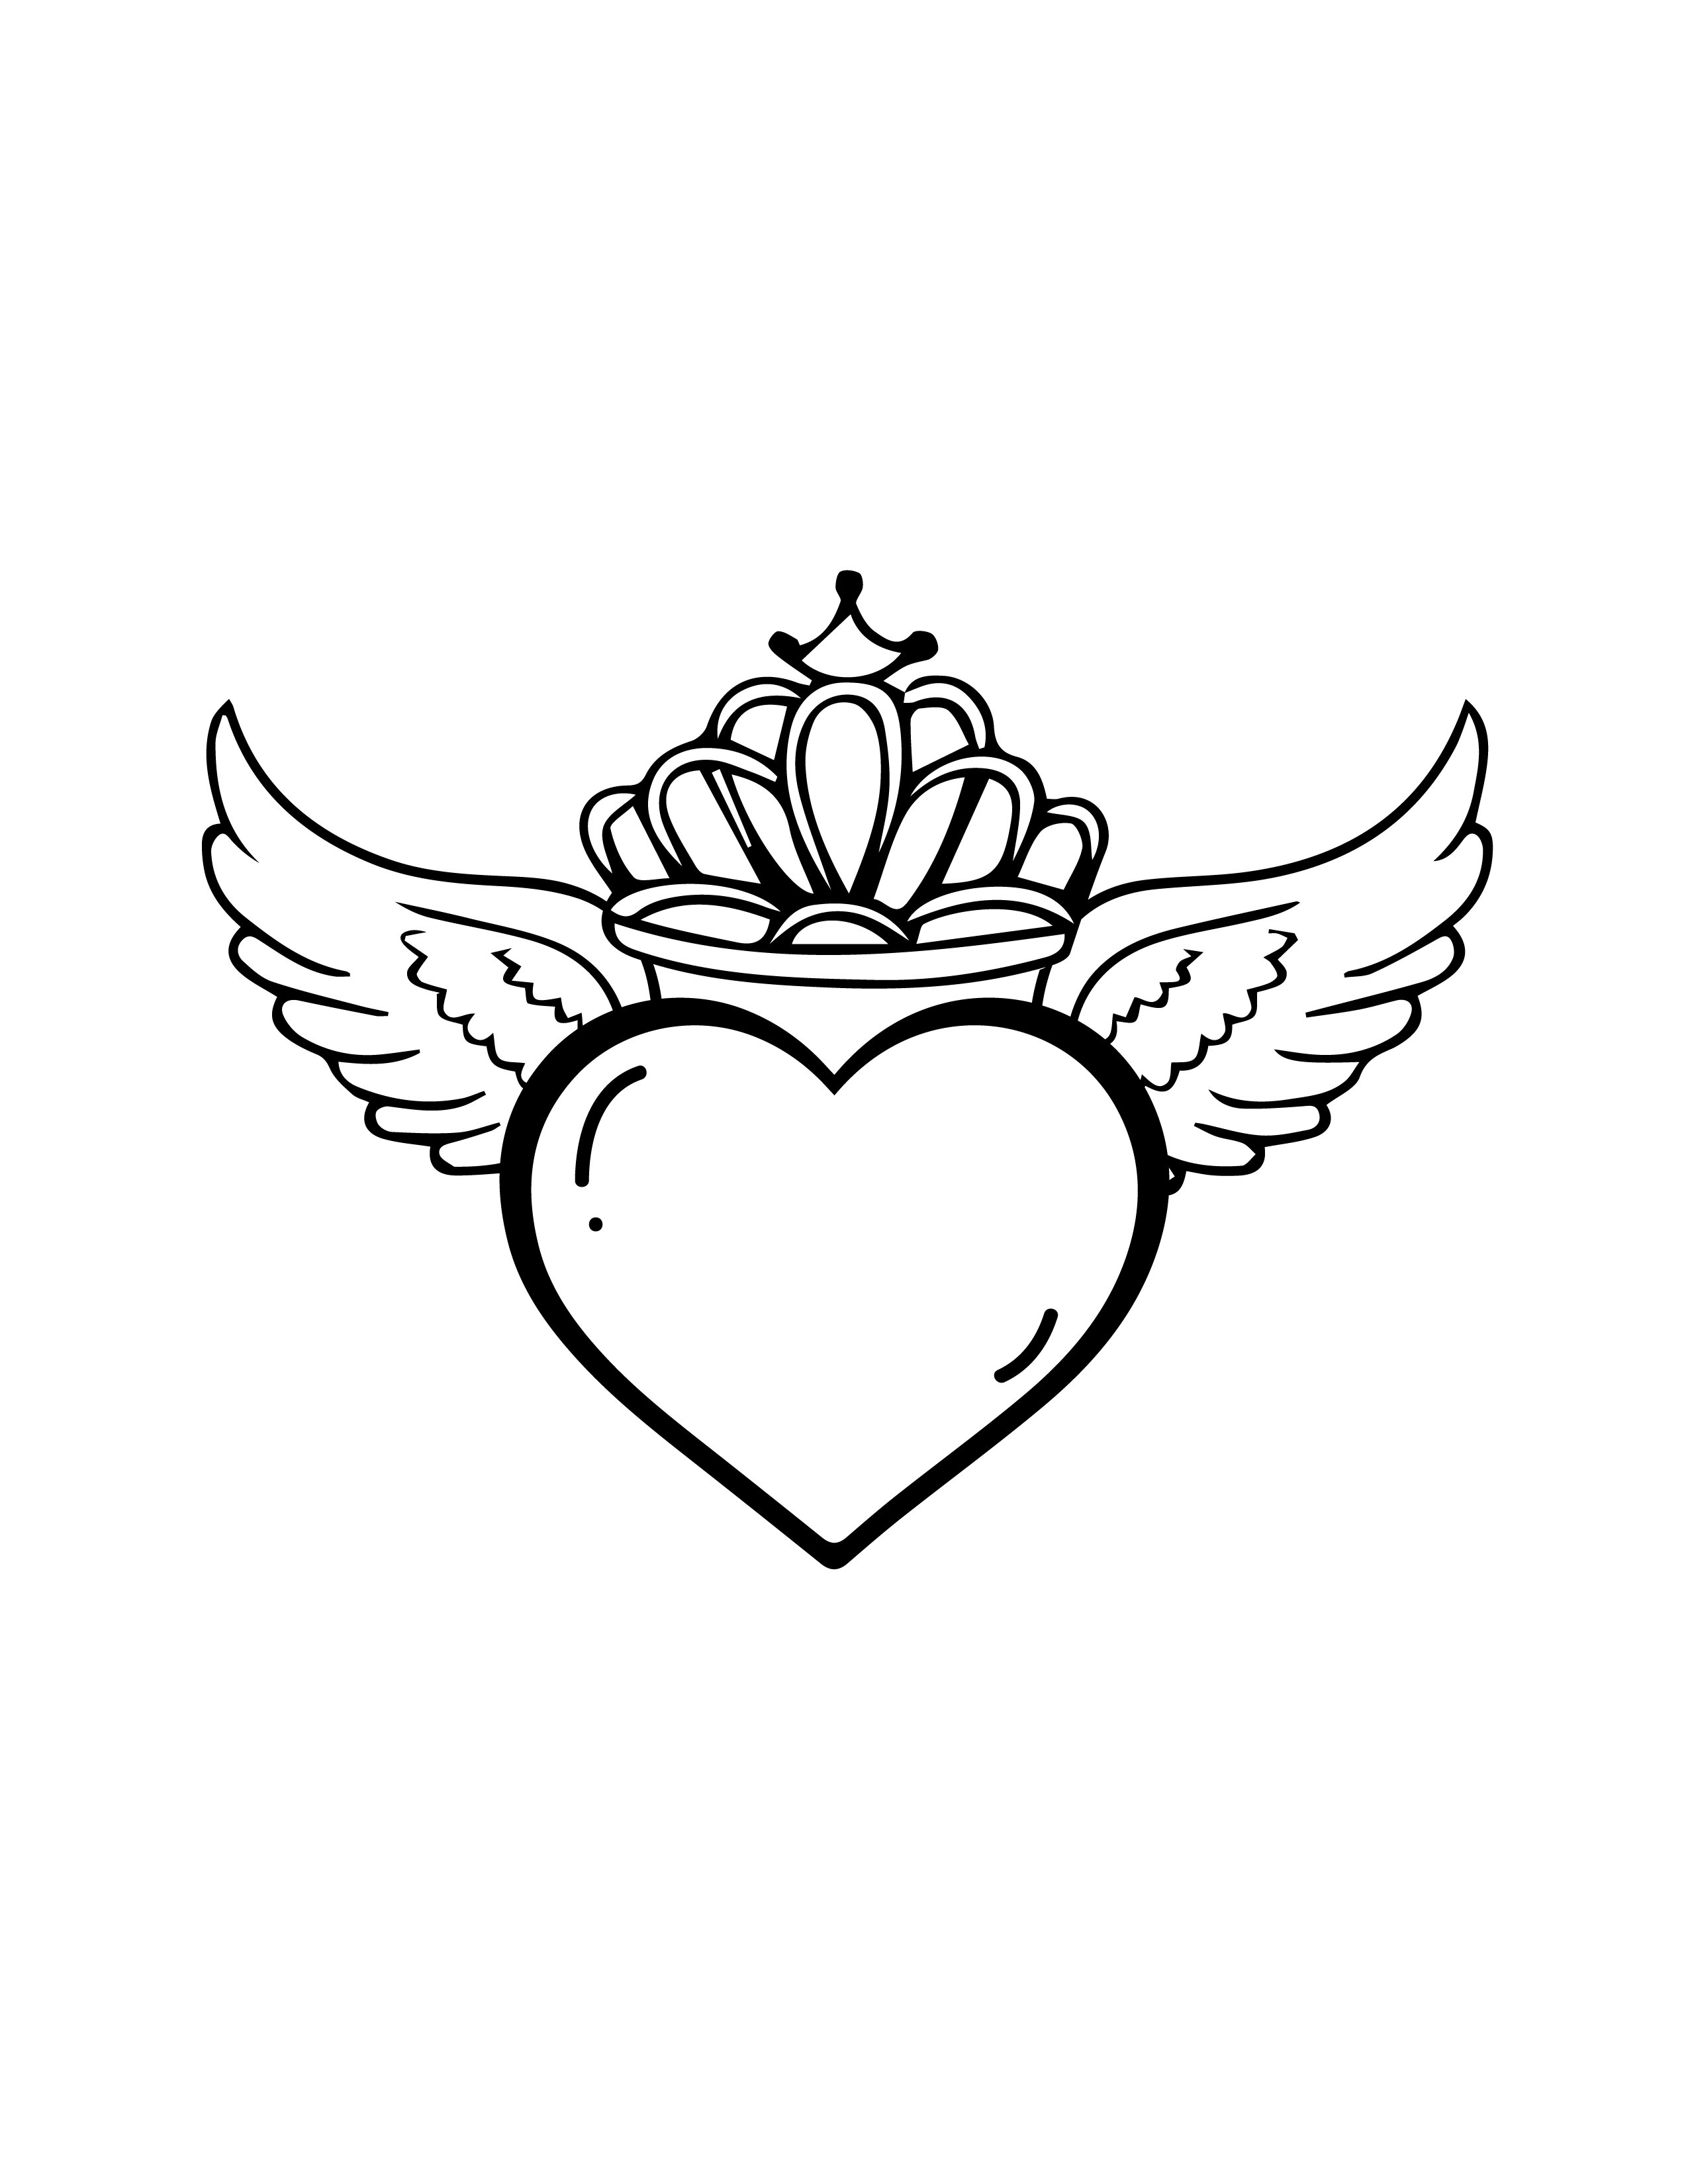 how to draw heart with wings and banner